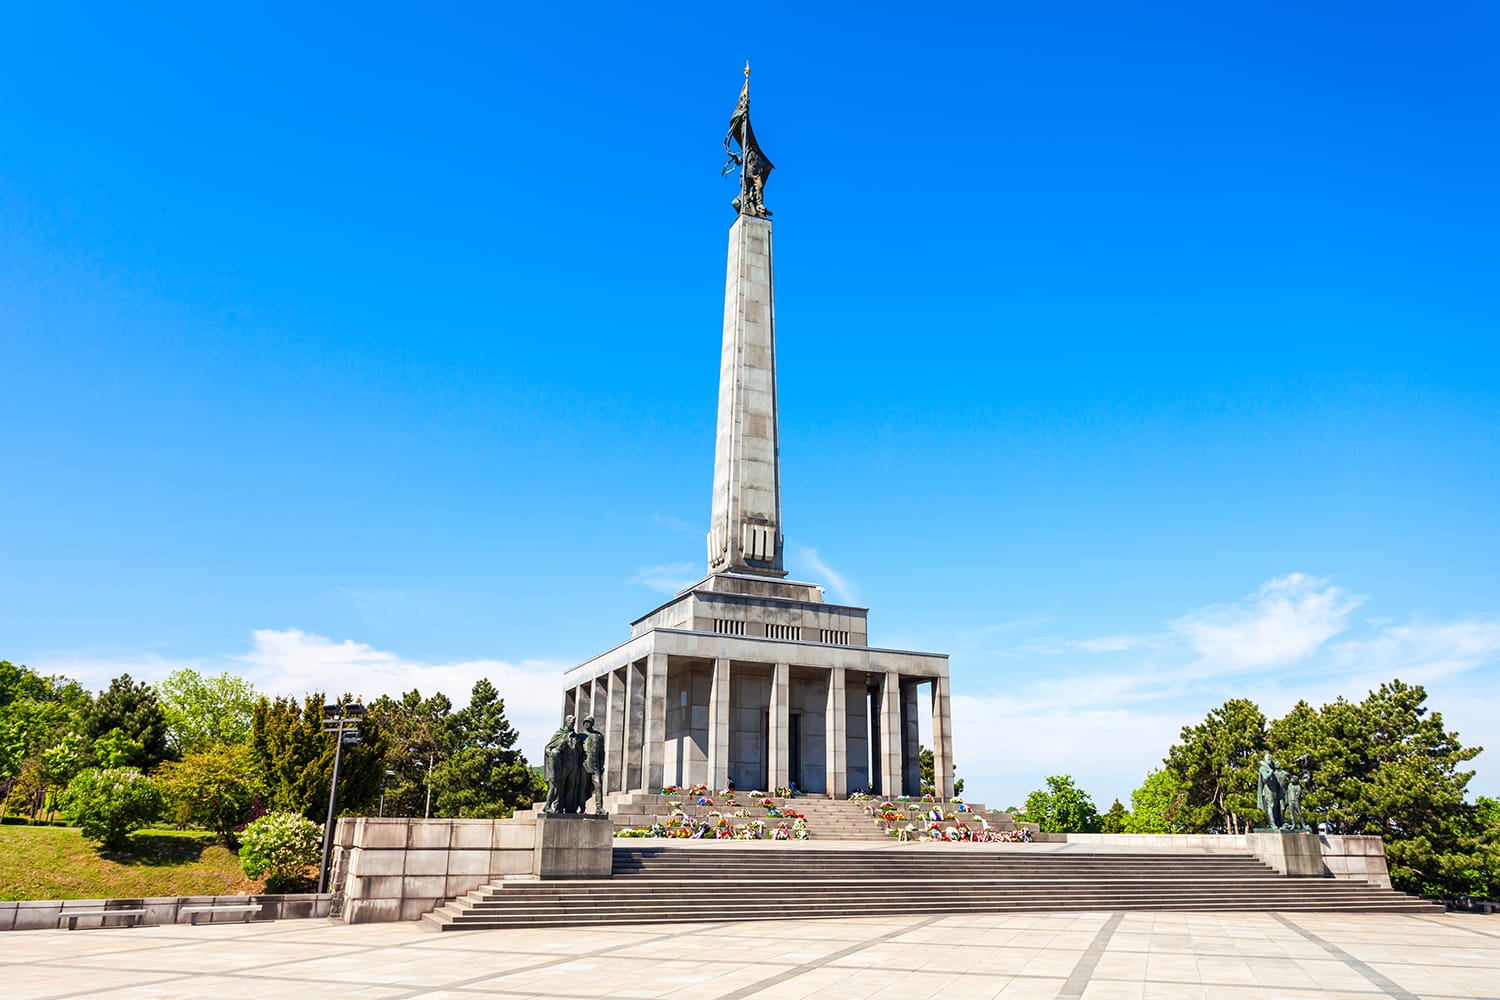 Slavin War Memorial is a monument and military cemetery in Bratislava, Slovakia. Slavin War Memorial is the burial ground of Soviet Army soldiers in World War II.